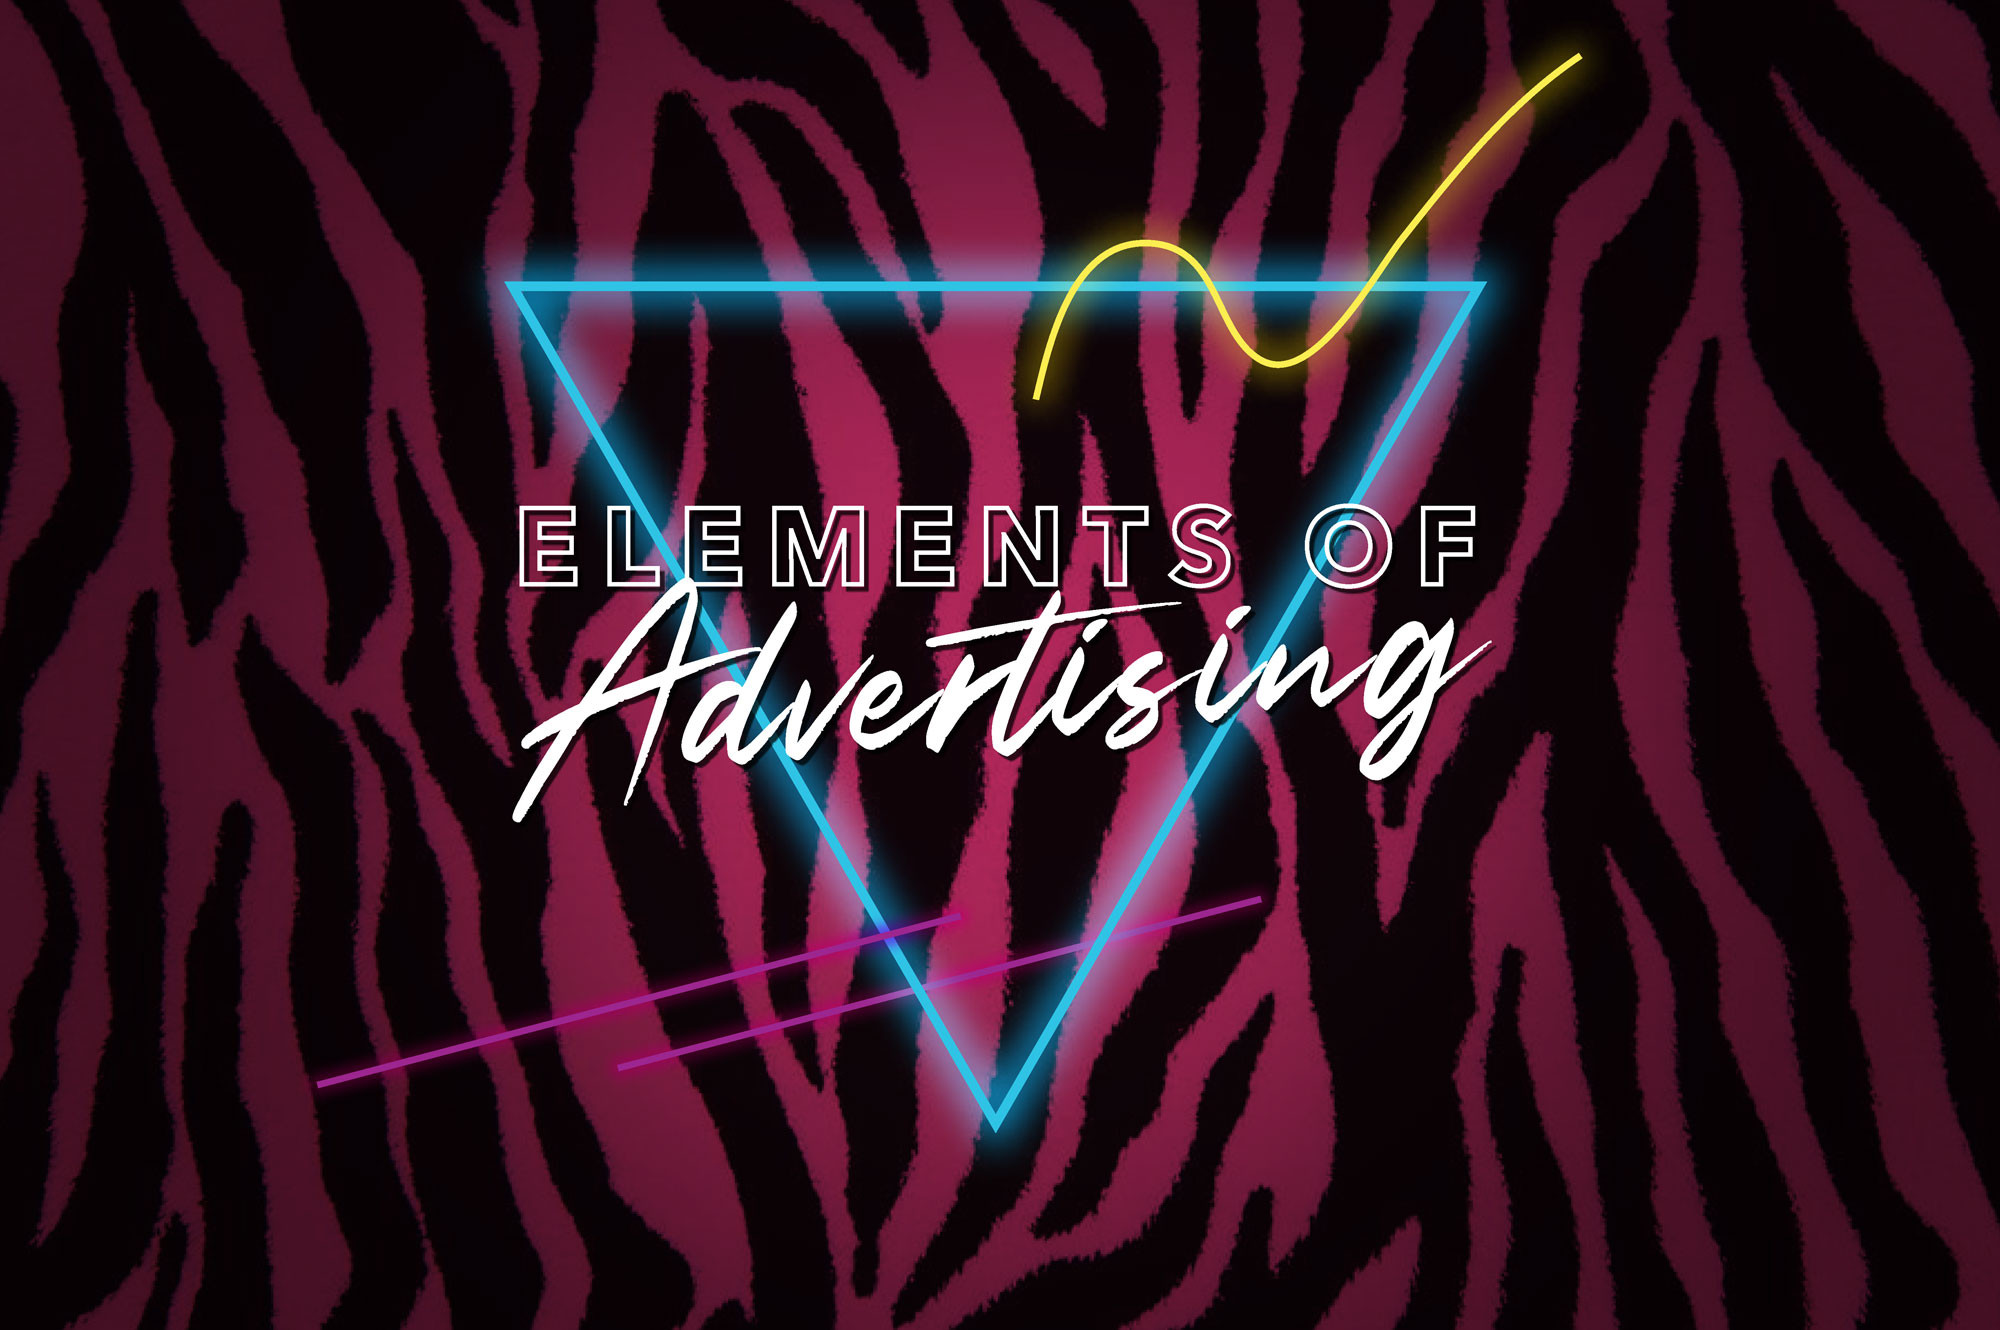 Elements of Advertising graphic